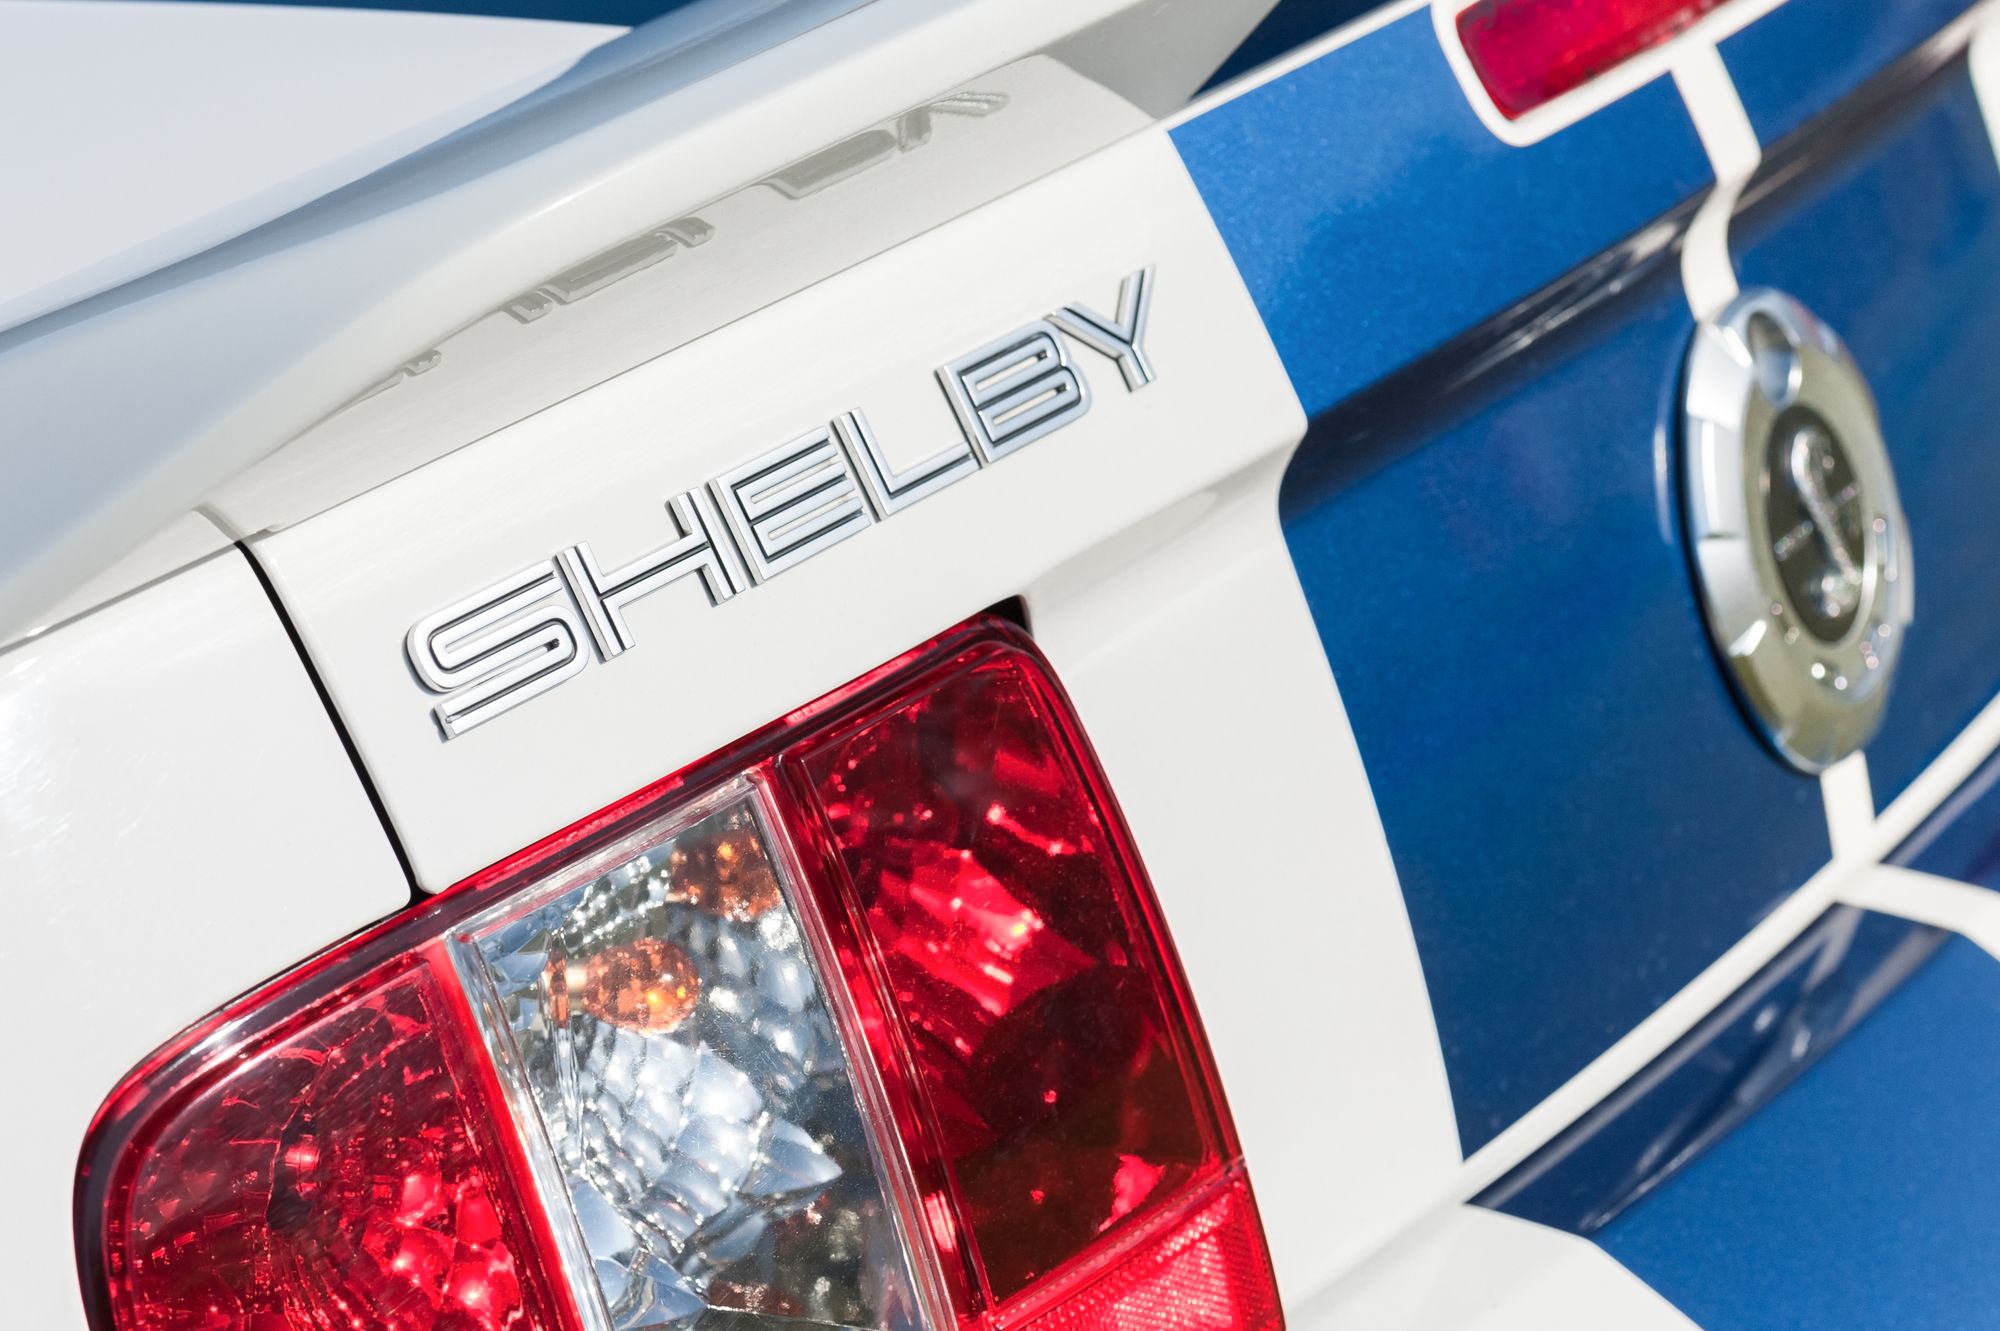 Rushmoor, UK - March 25, 2016: Vehicle badge closeup of a Ford Mustang Shelby GT500 muscle car.